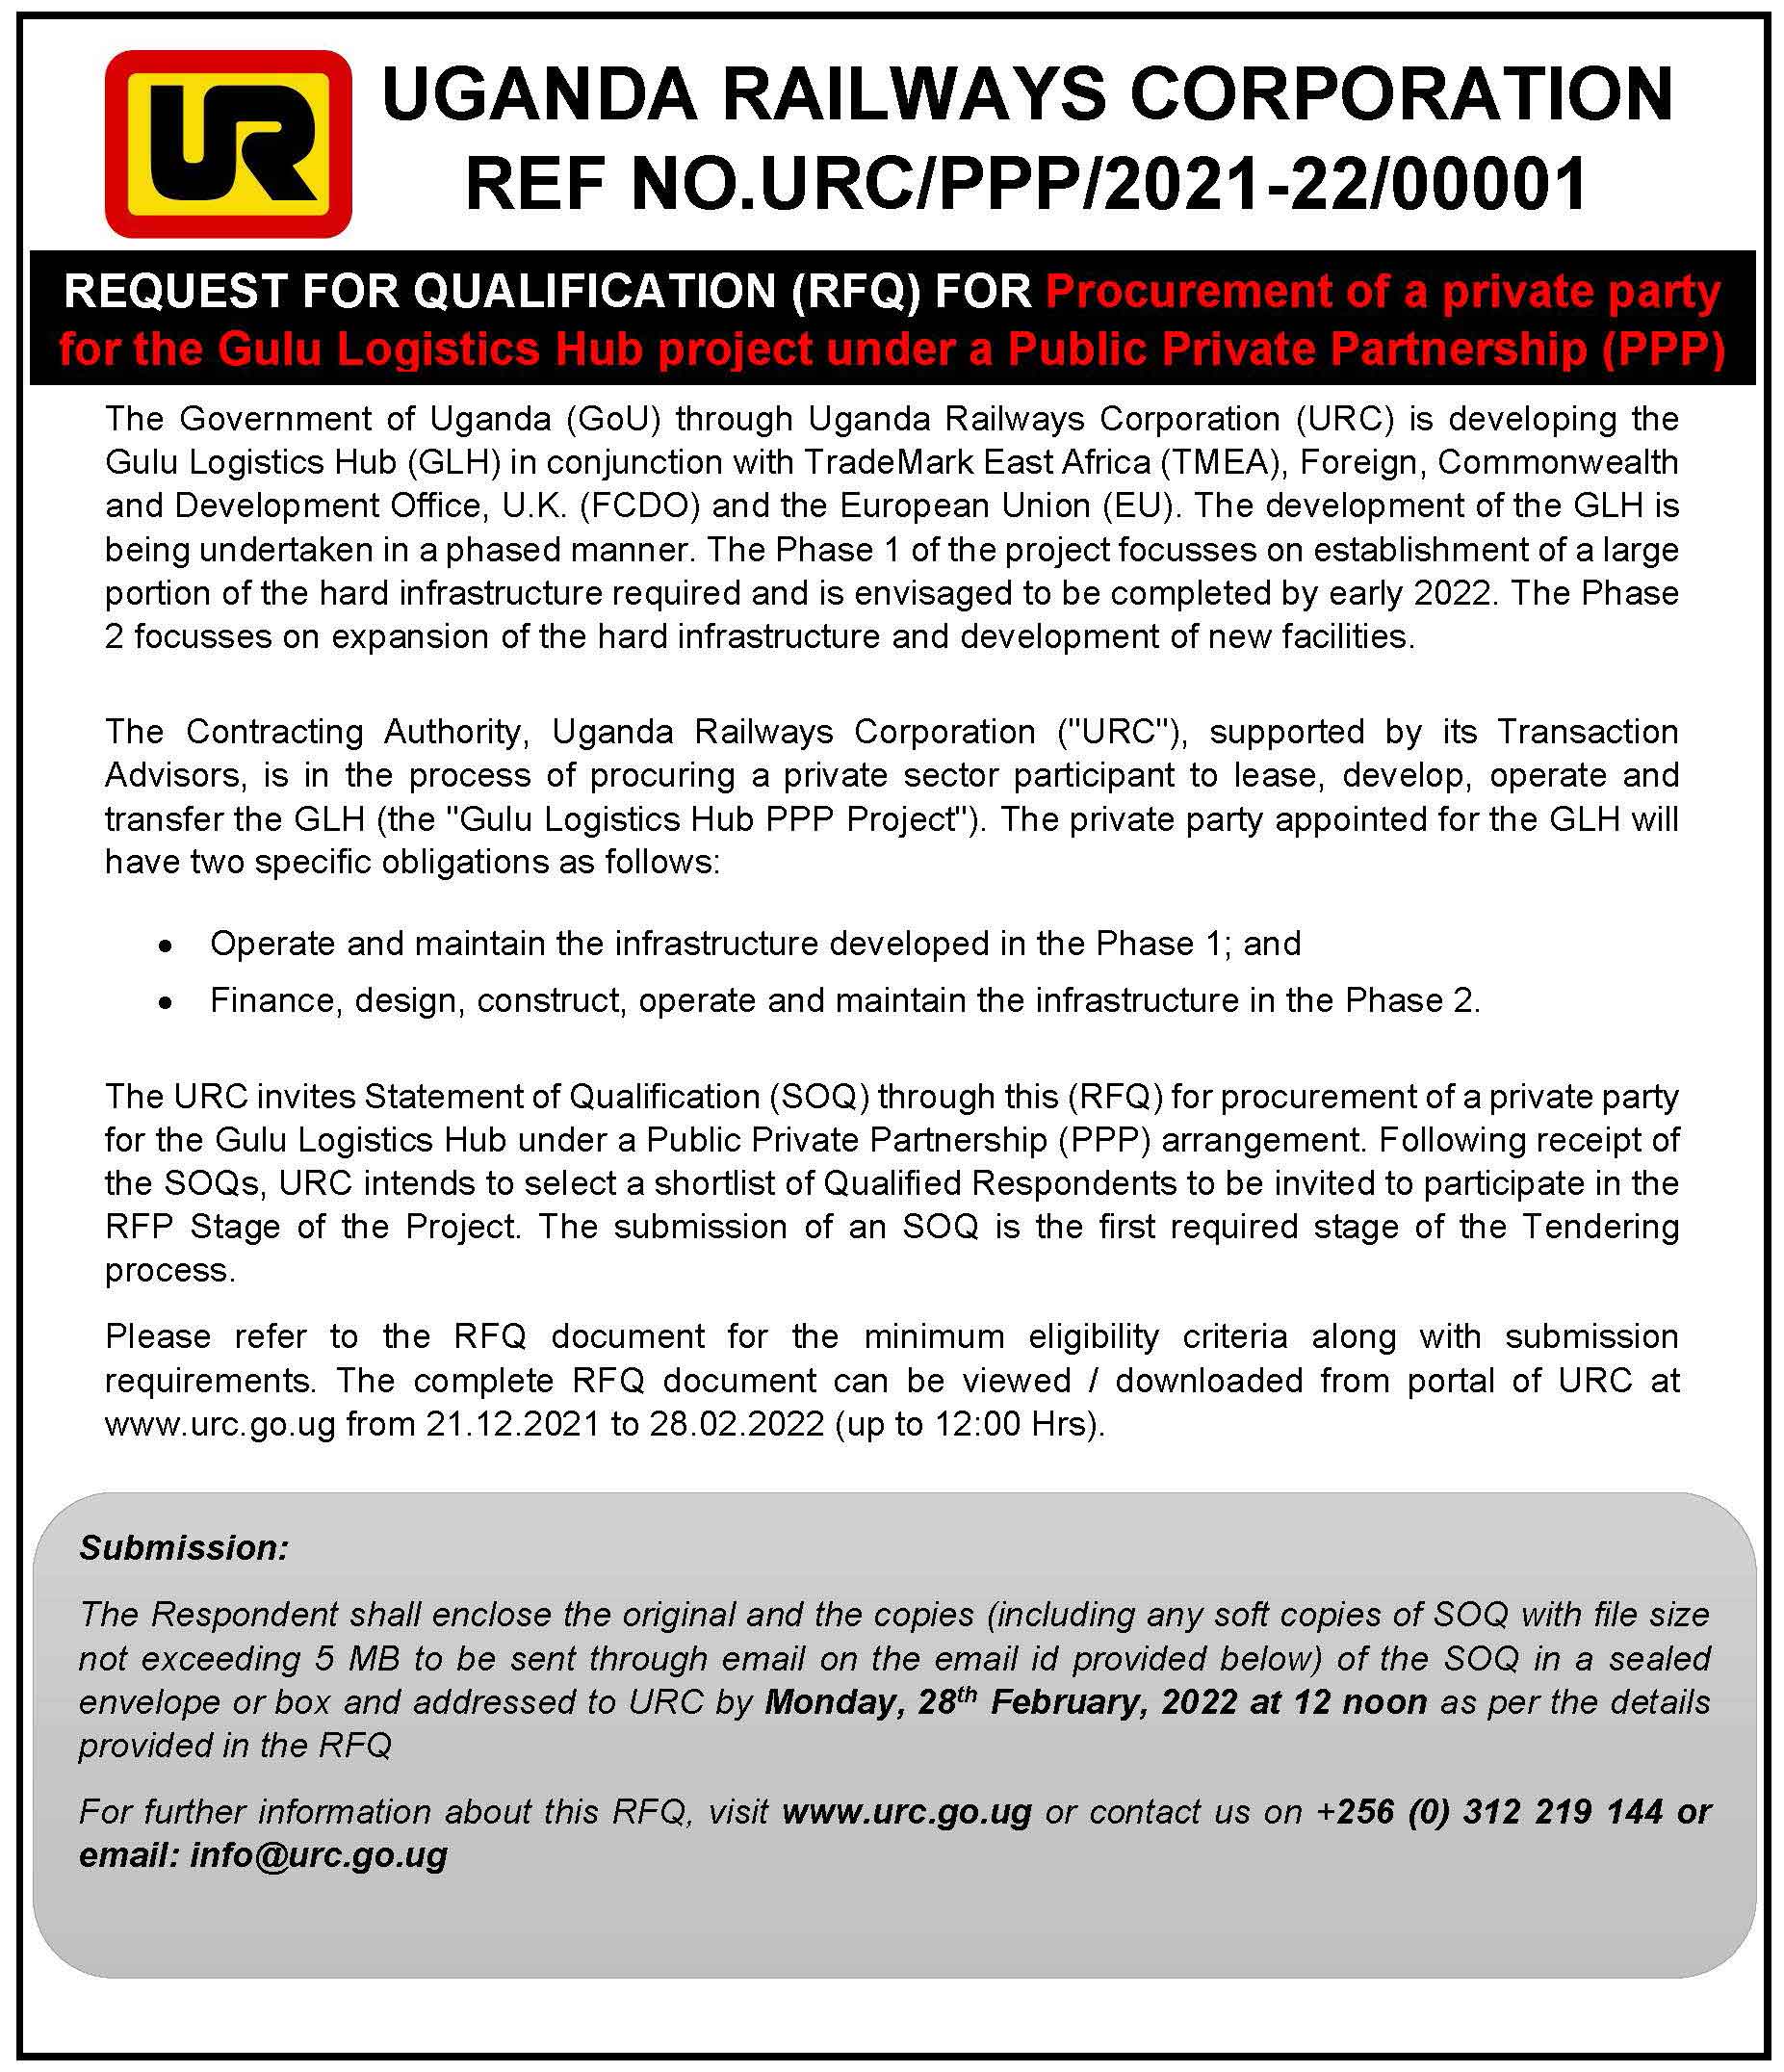 Request For Qualification (RFQ) for Procurement of a private party for the Gulu Logistics Hub Project under a Public-Private Partnership (PPP)